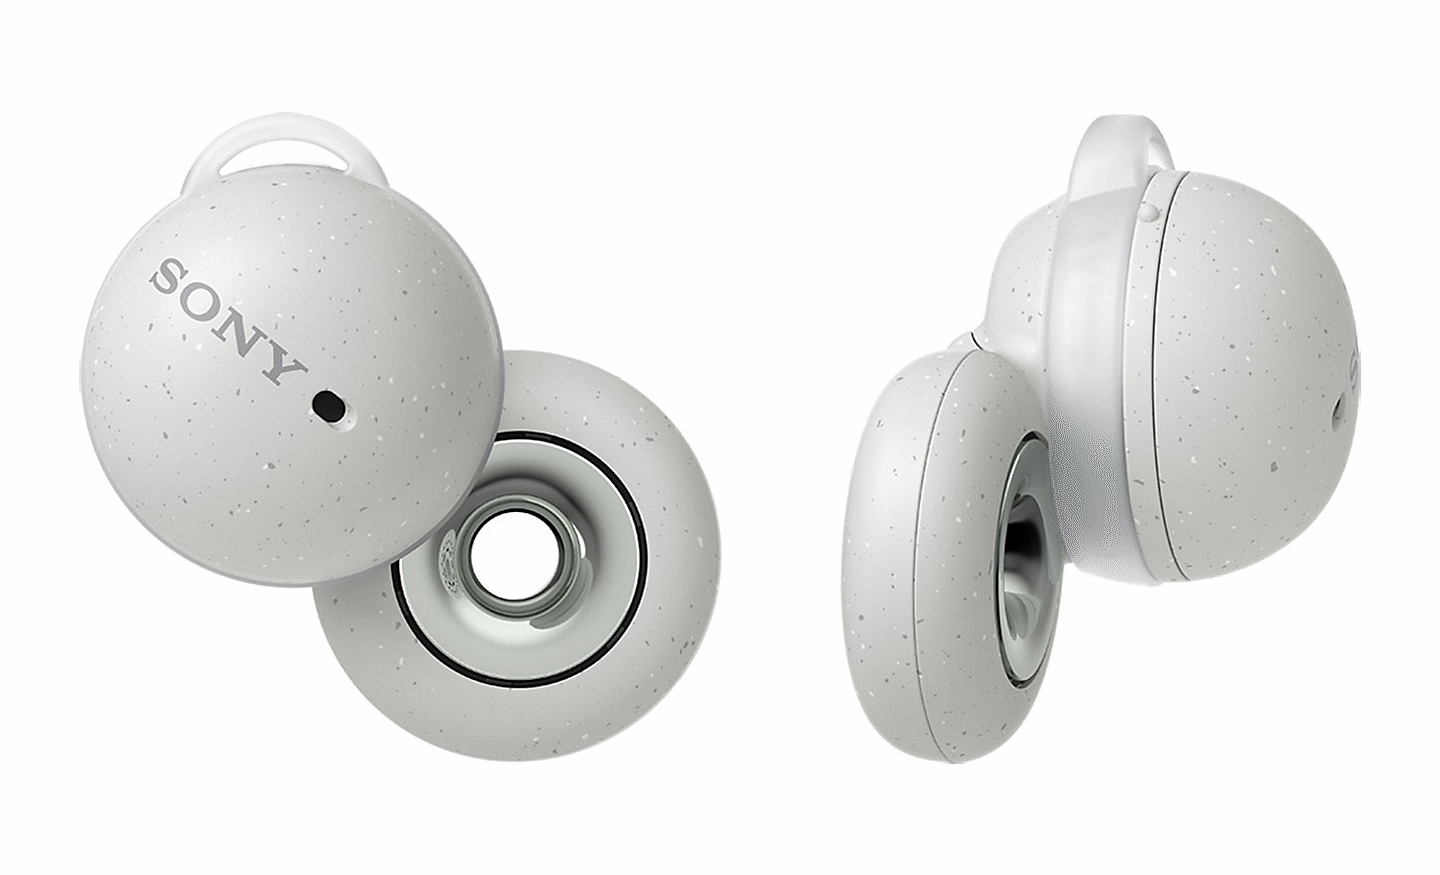 Image of the white Sony LinkBuds headphones. One earbud is shot from behind, the other from the side